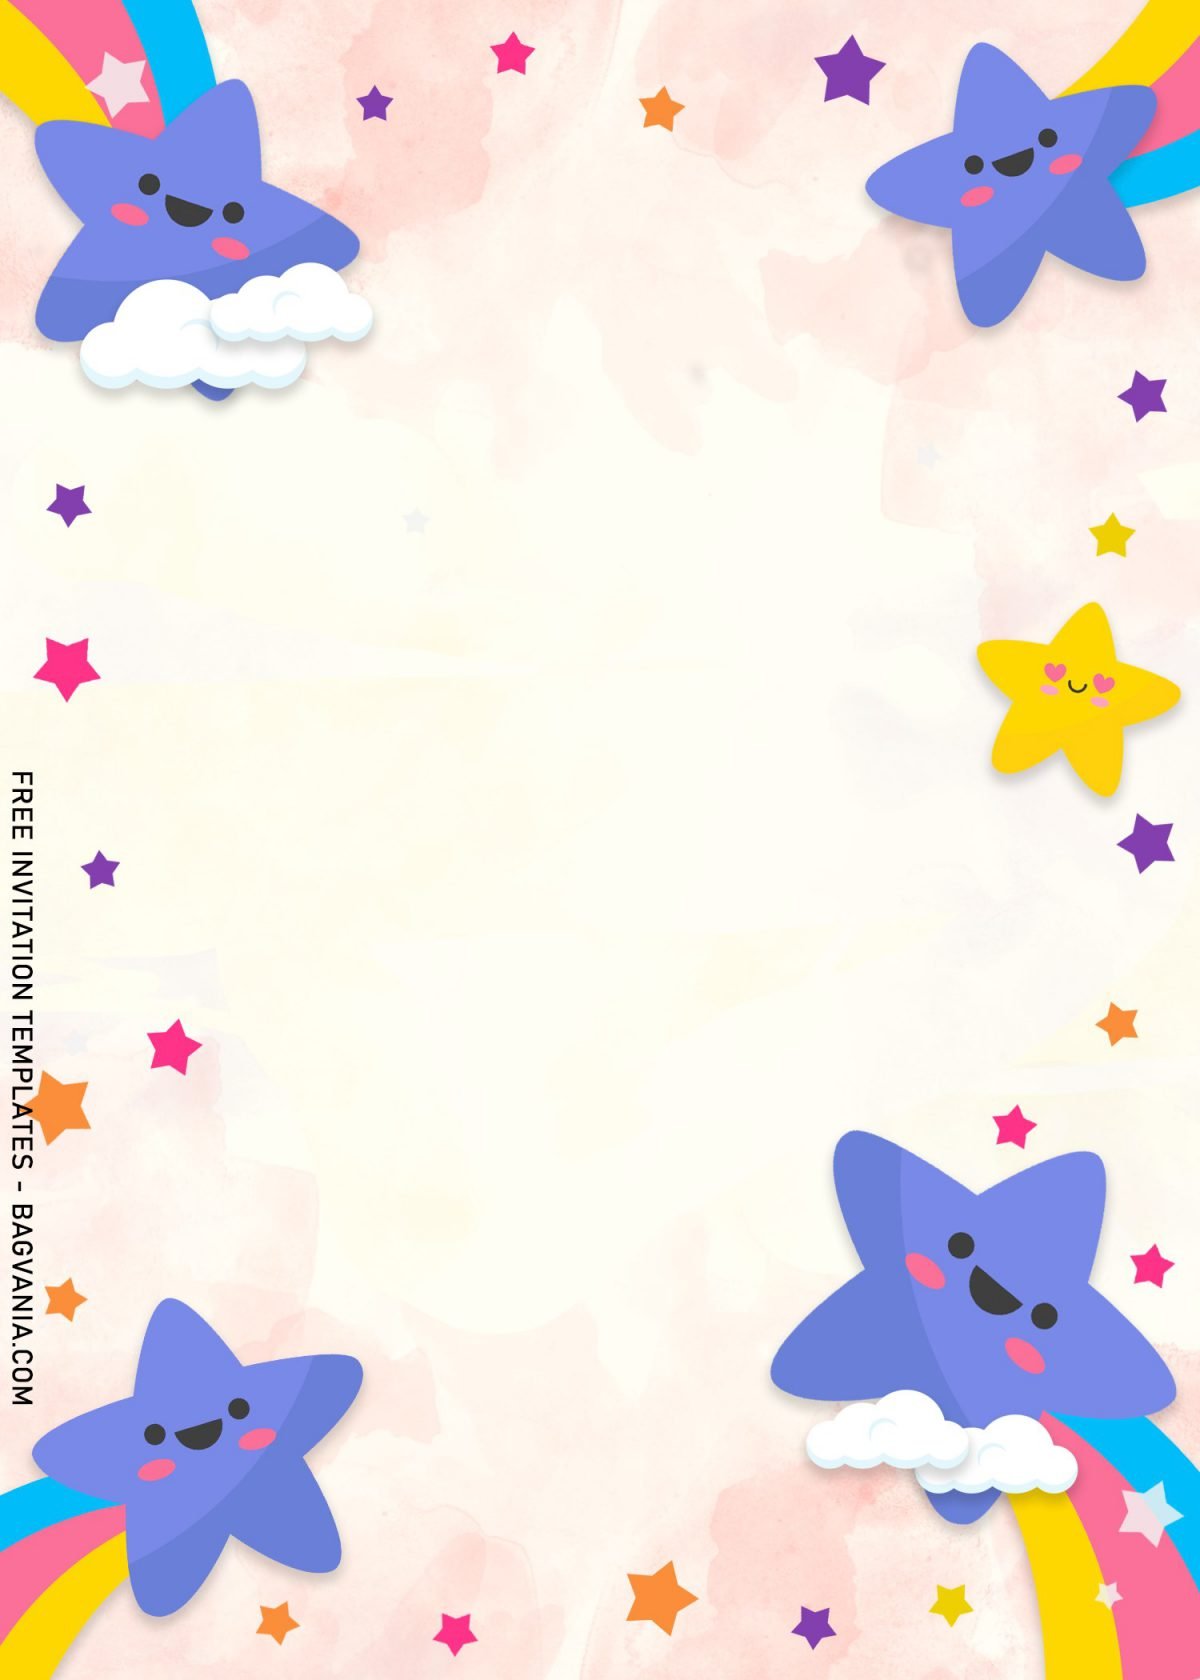 9+ Colorful Rainbow Invitation Card Templates For A Whimsical Birthday Party and has adorable blue stars and rainbow